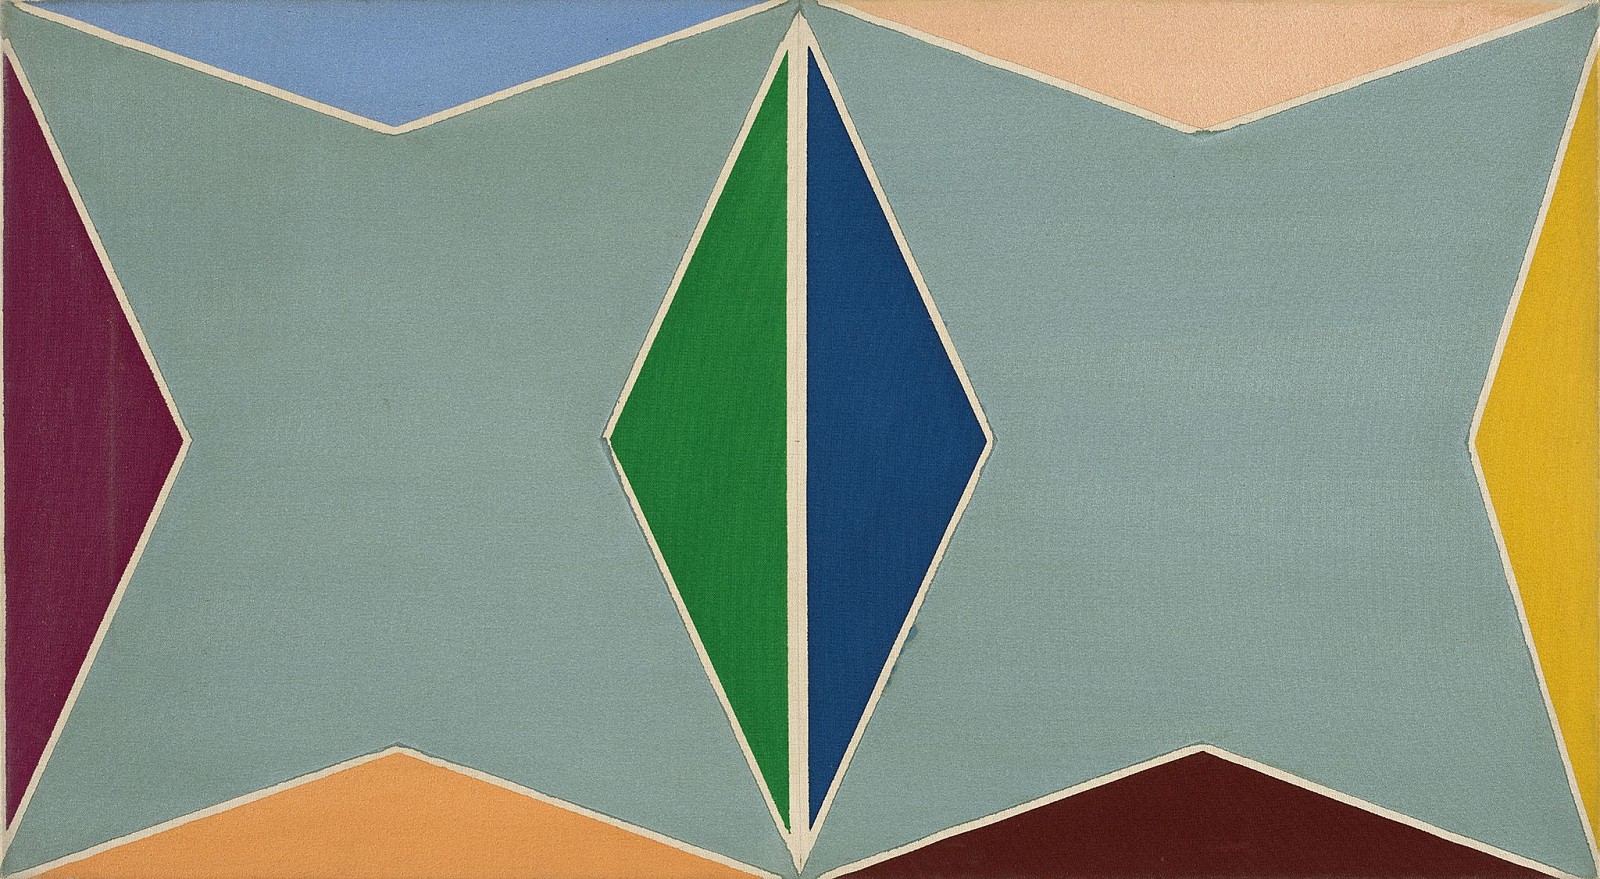 Larry Zox, Untitled (Double Gemini), 1969
Acrylic on canvas, 22 x 40 in. (55.9 x 101.6 cm)
ZOX-00091